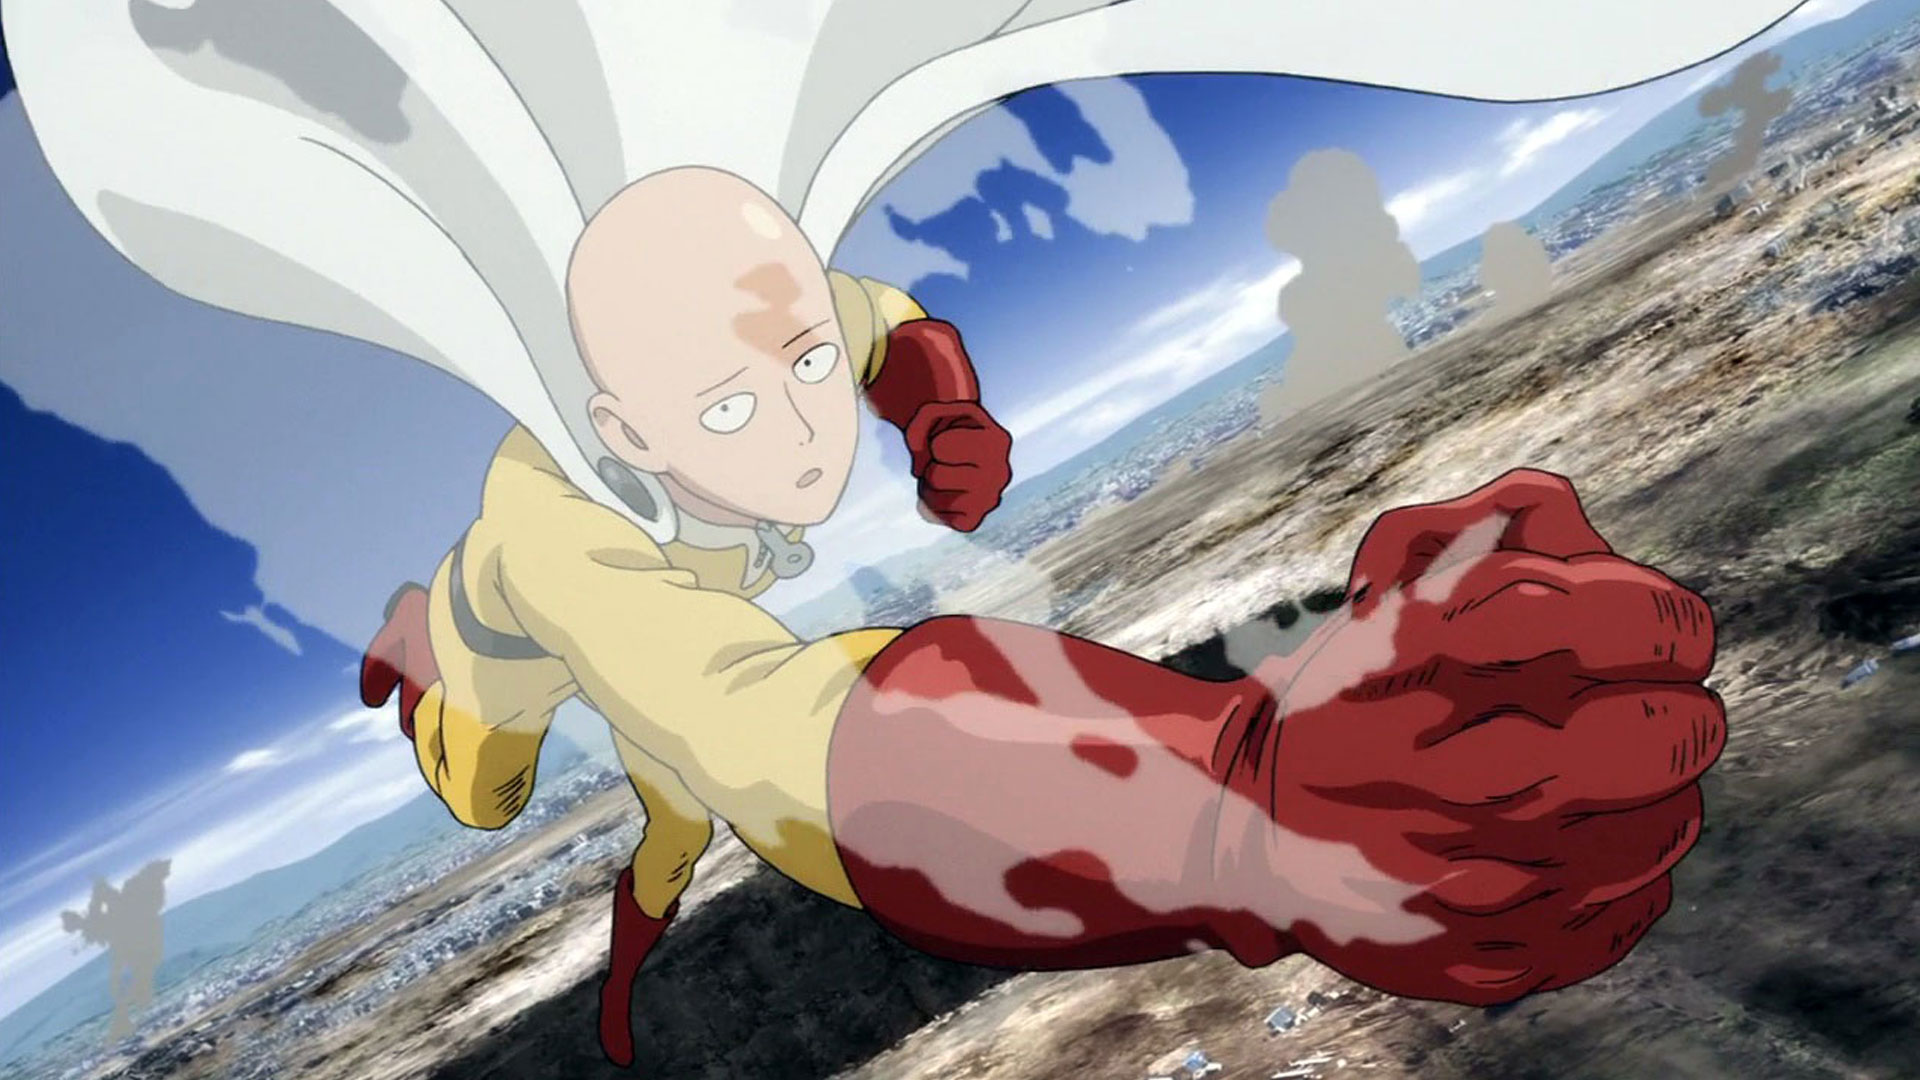 Why Does One Punch Man Work So Well? No, It's Not Just Comedy and Epic Fights